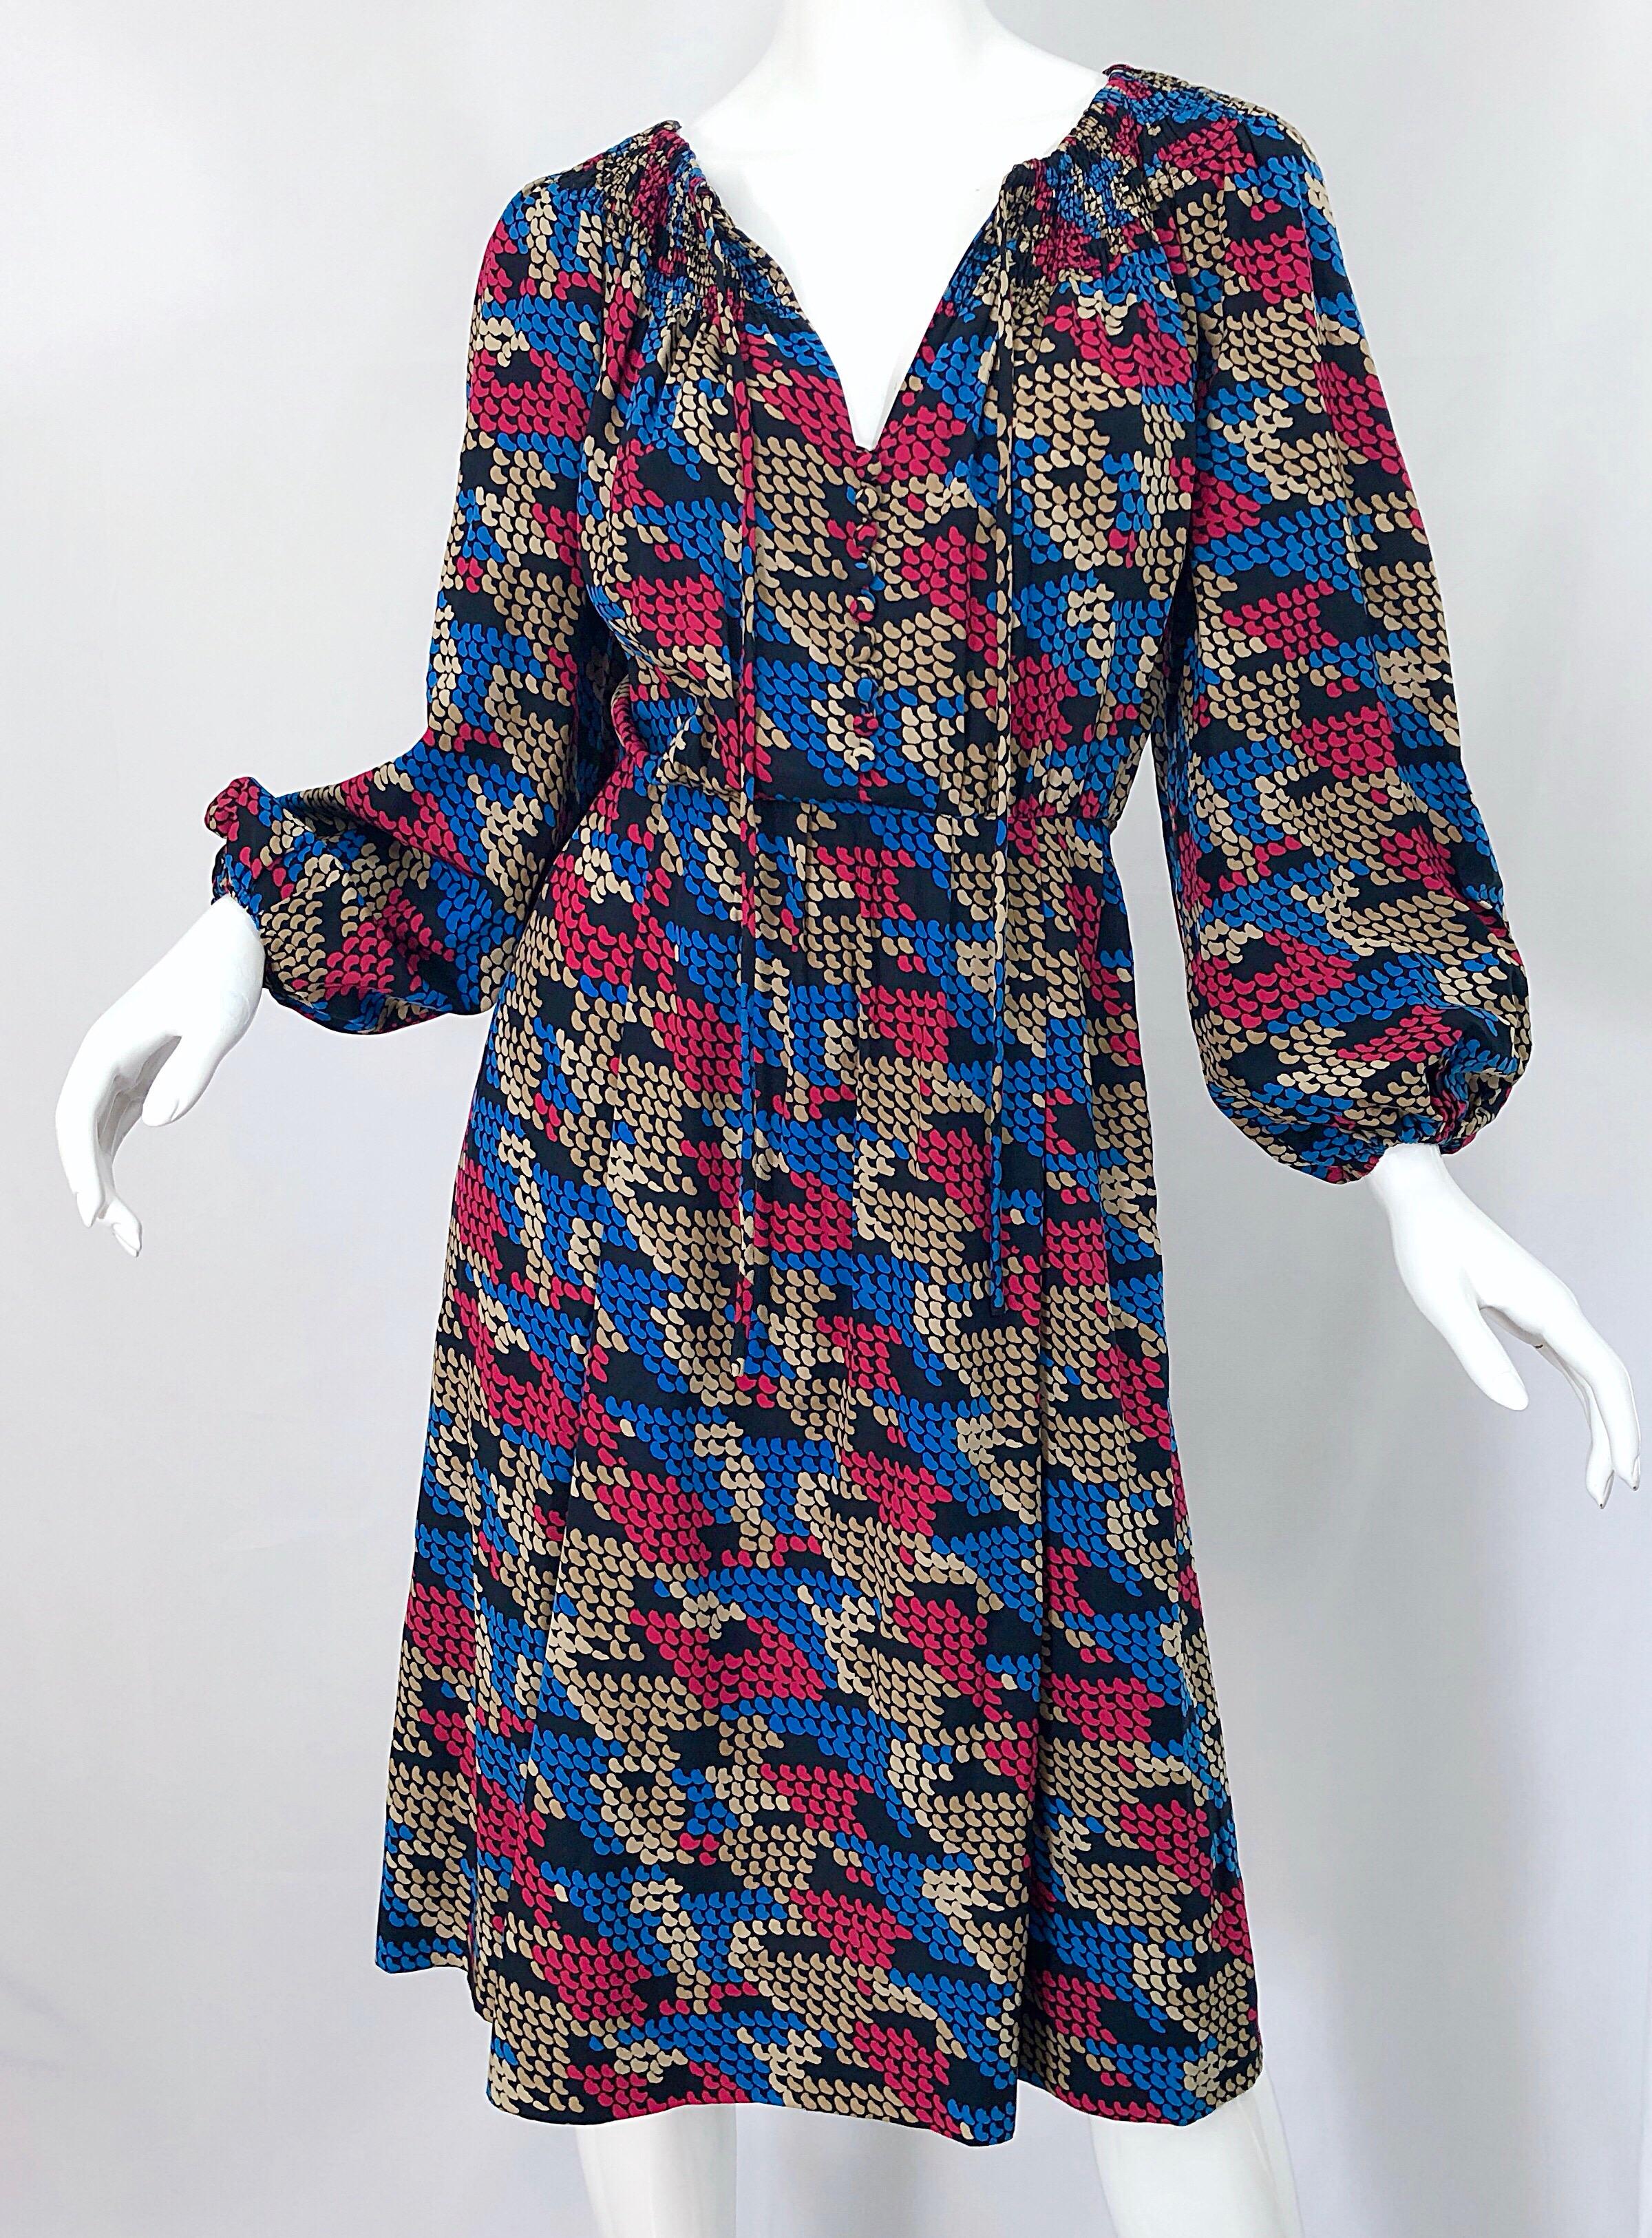 Givenchy Haute Couture 1970s Exaggerated Houndstooth Bishop Sleeve Vintage Dress For Sale 4